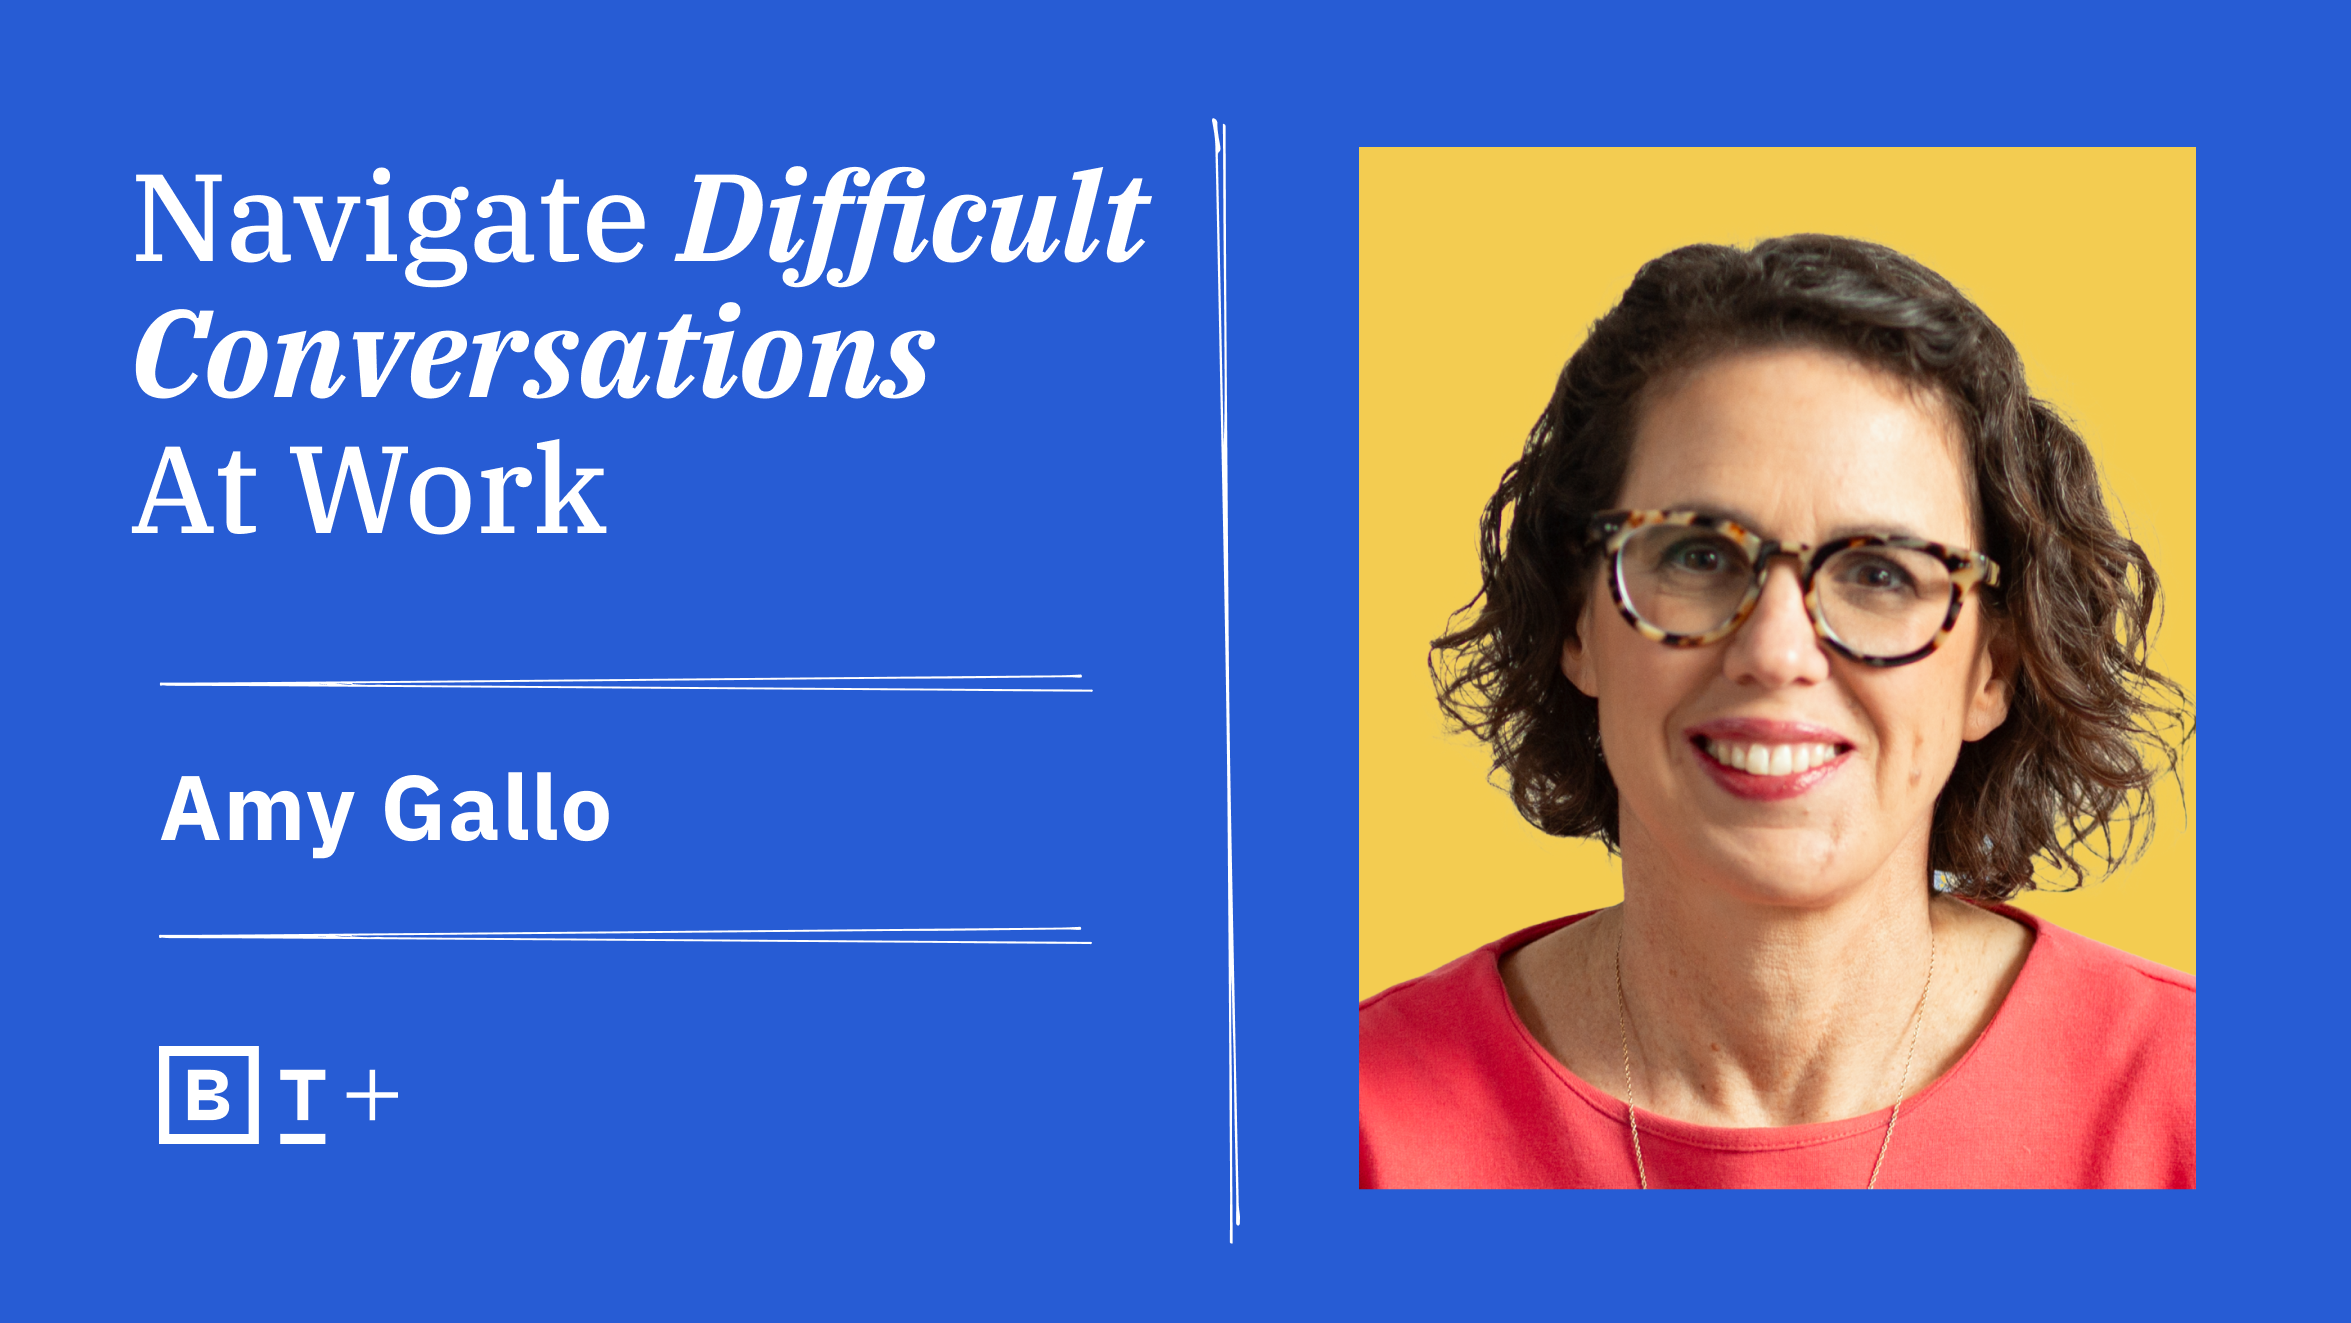 Navigate different conversations at work with amy gallo.